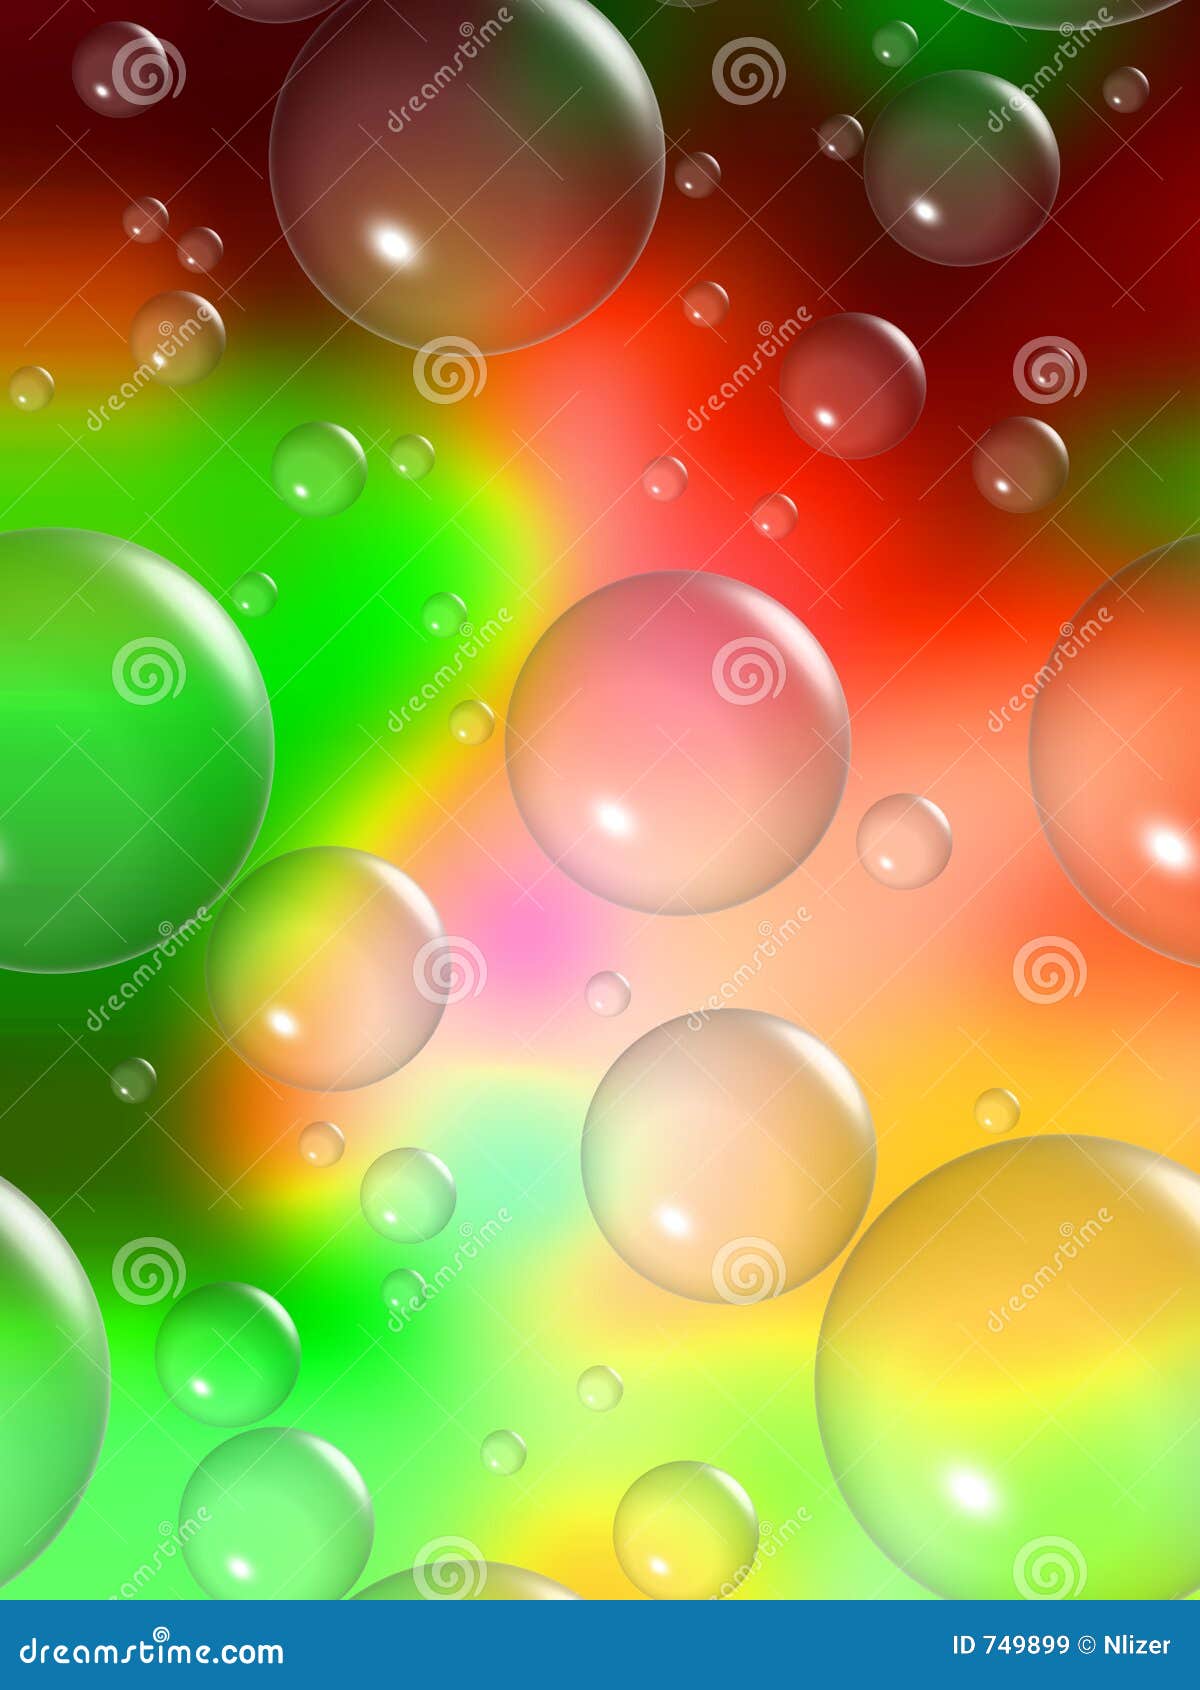 Vibrant Background With Bubbles Wallpaper Stock Illustration